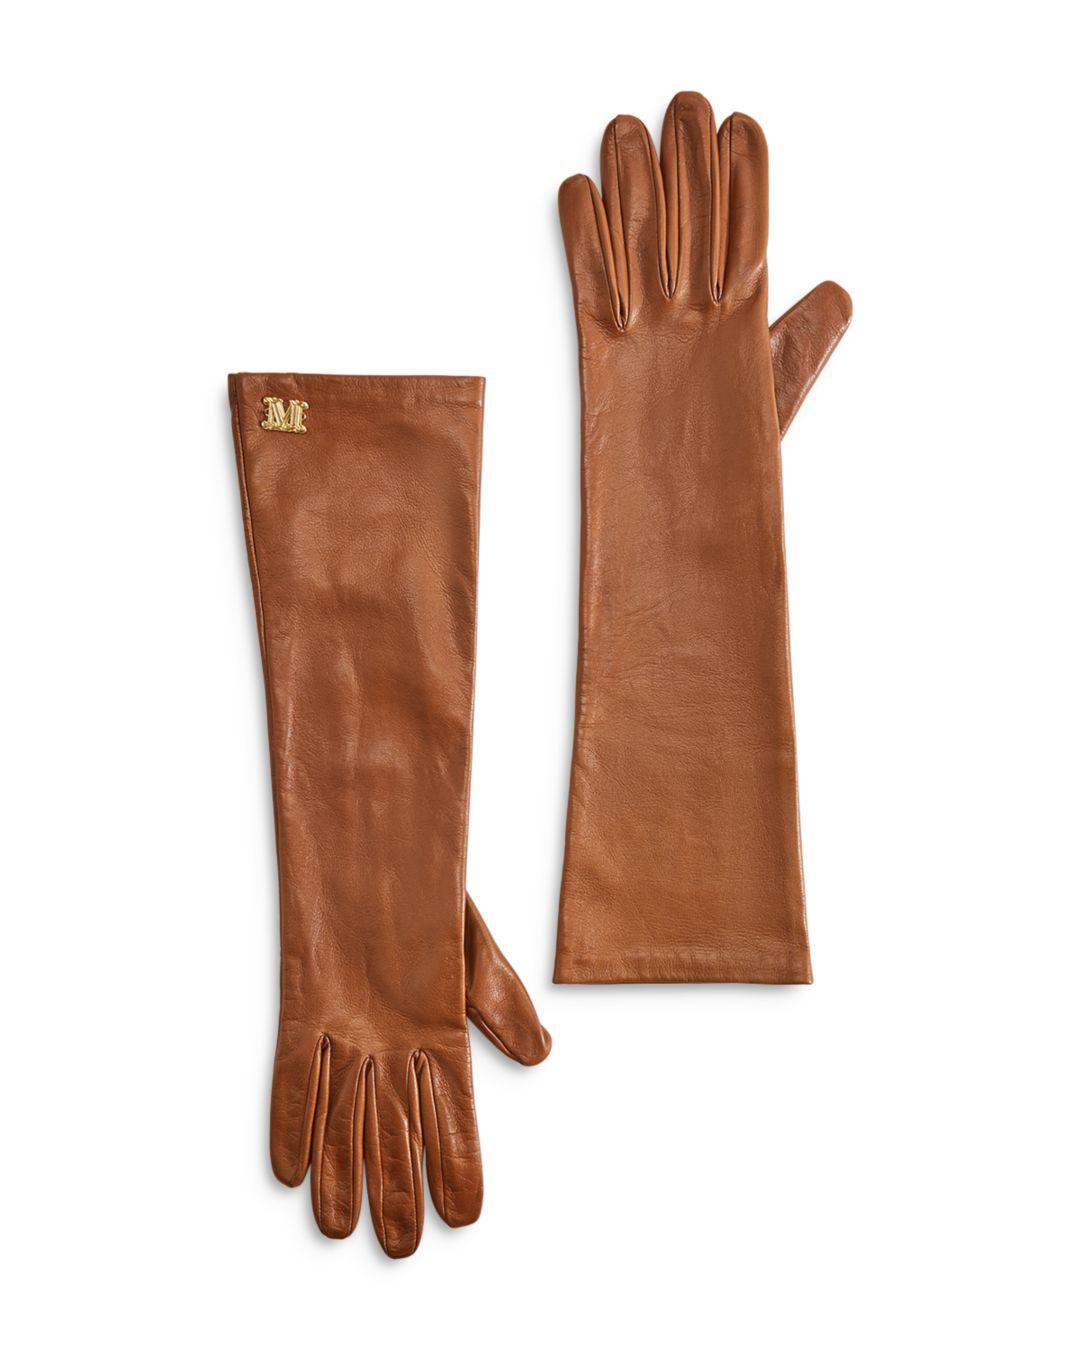 Max Mara Leather Afide Long Gloves in Camel (Brown) - Save 30% - Lyst